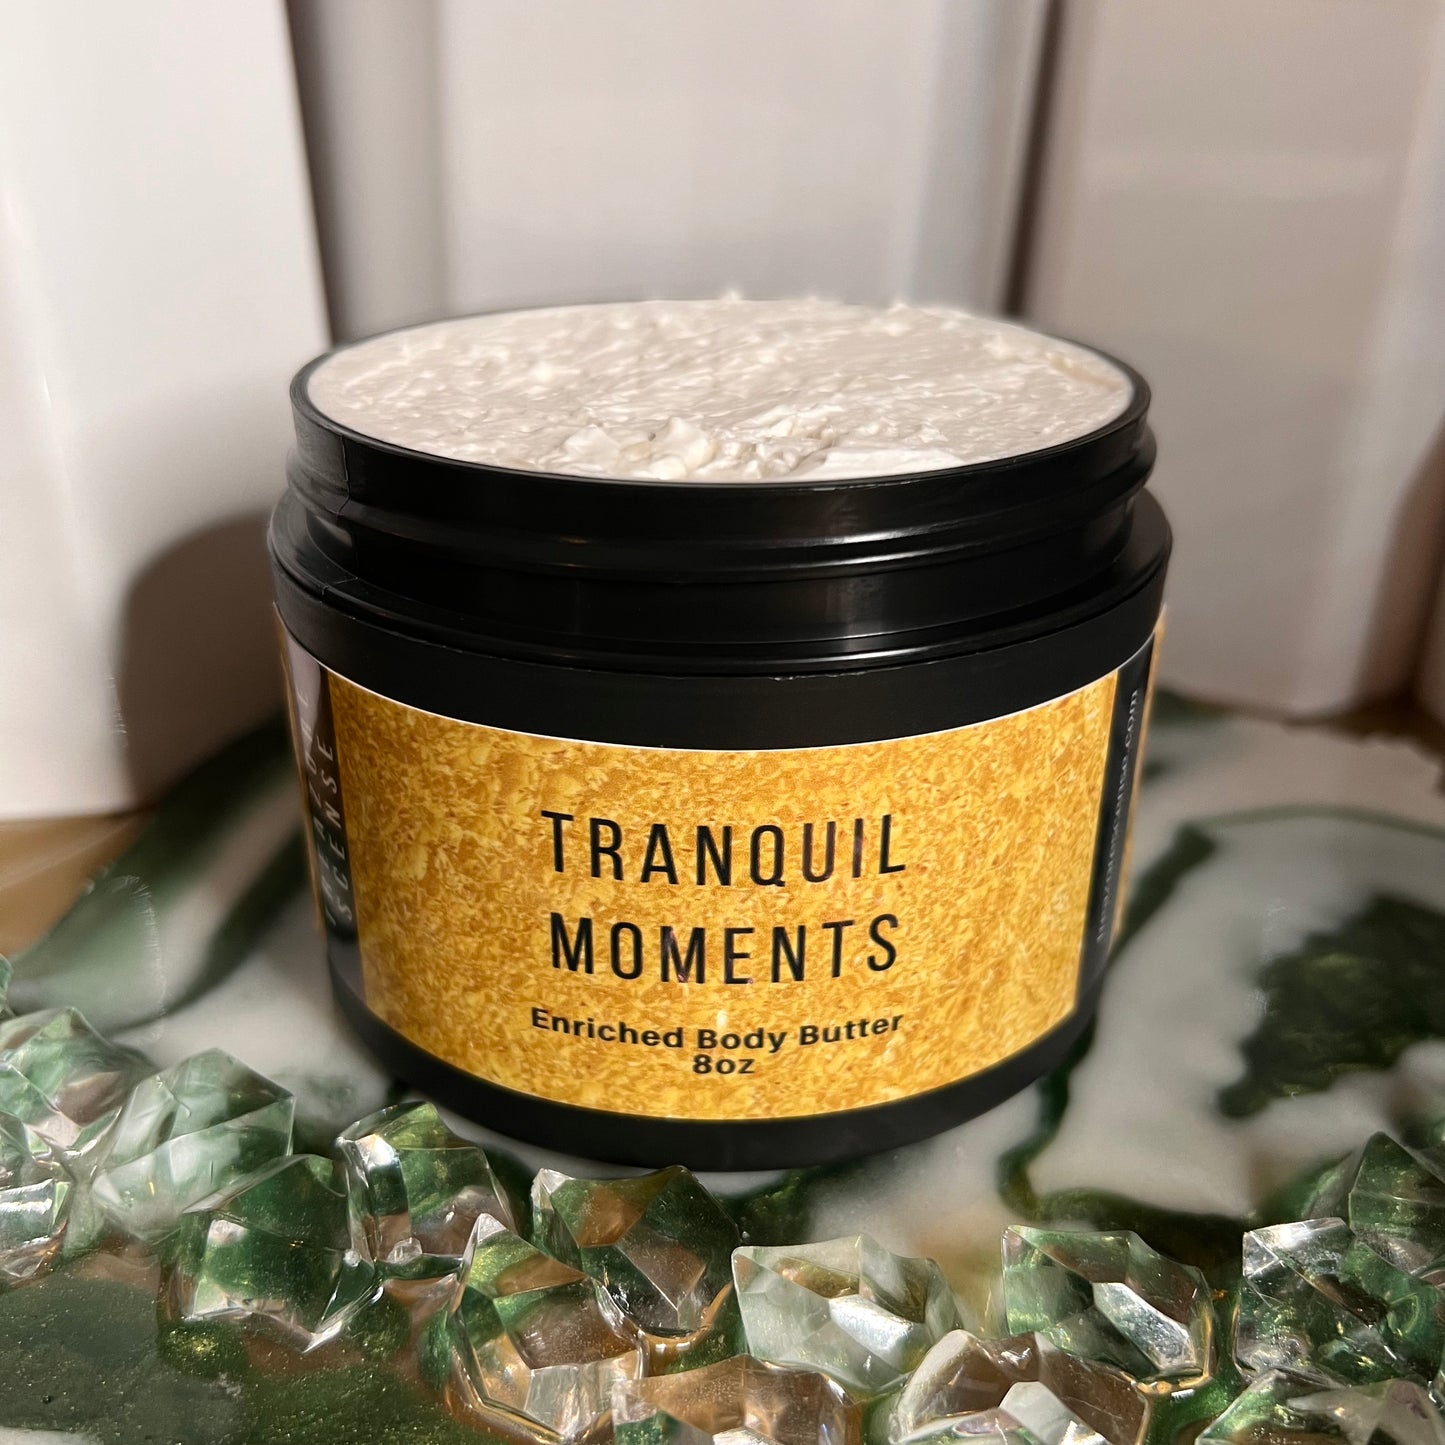 Tranquil Moments Body Butter